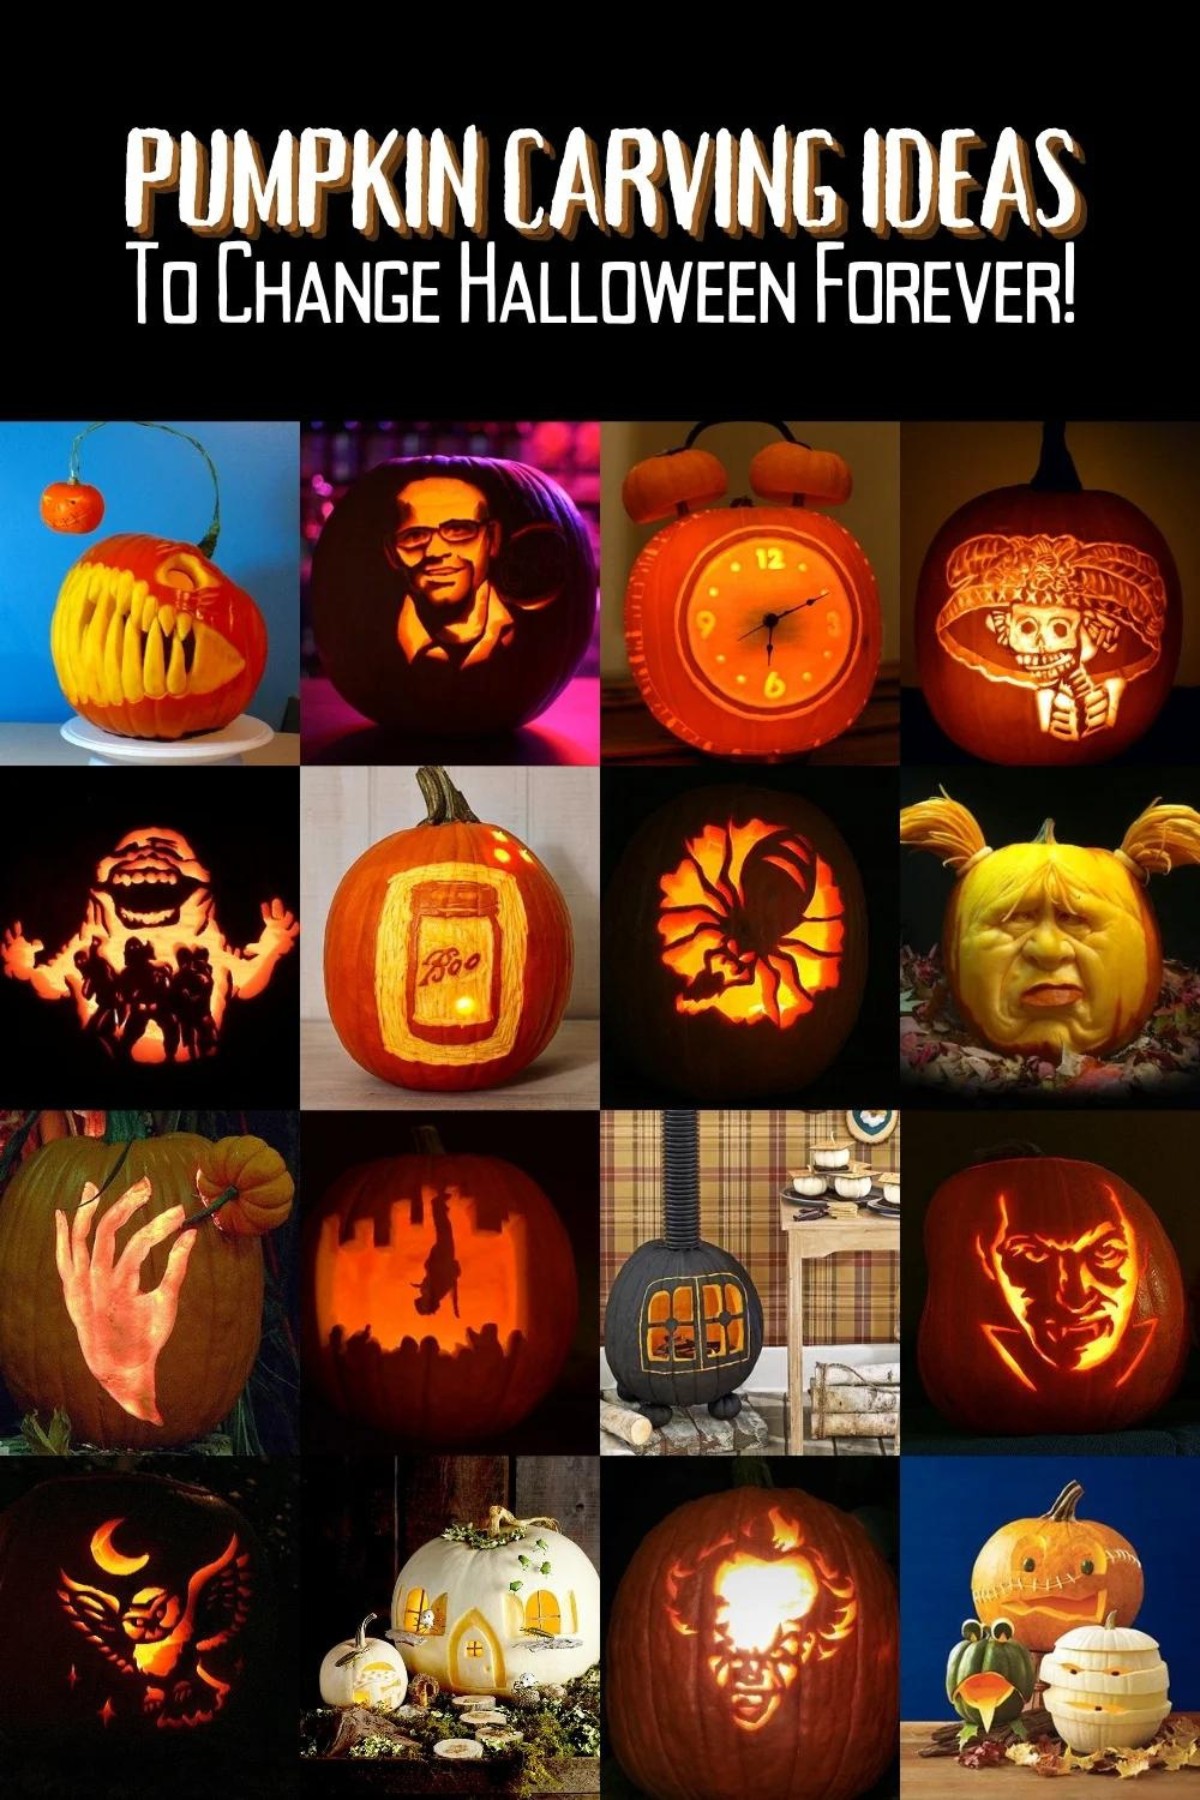 Fun Pumpkin Carving Ideas to Try this Year